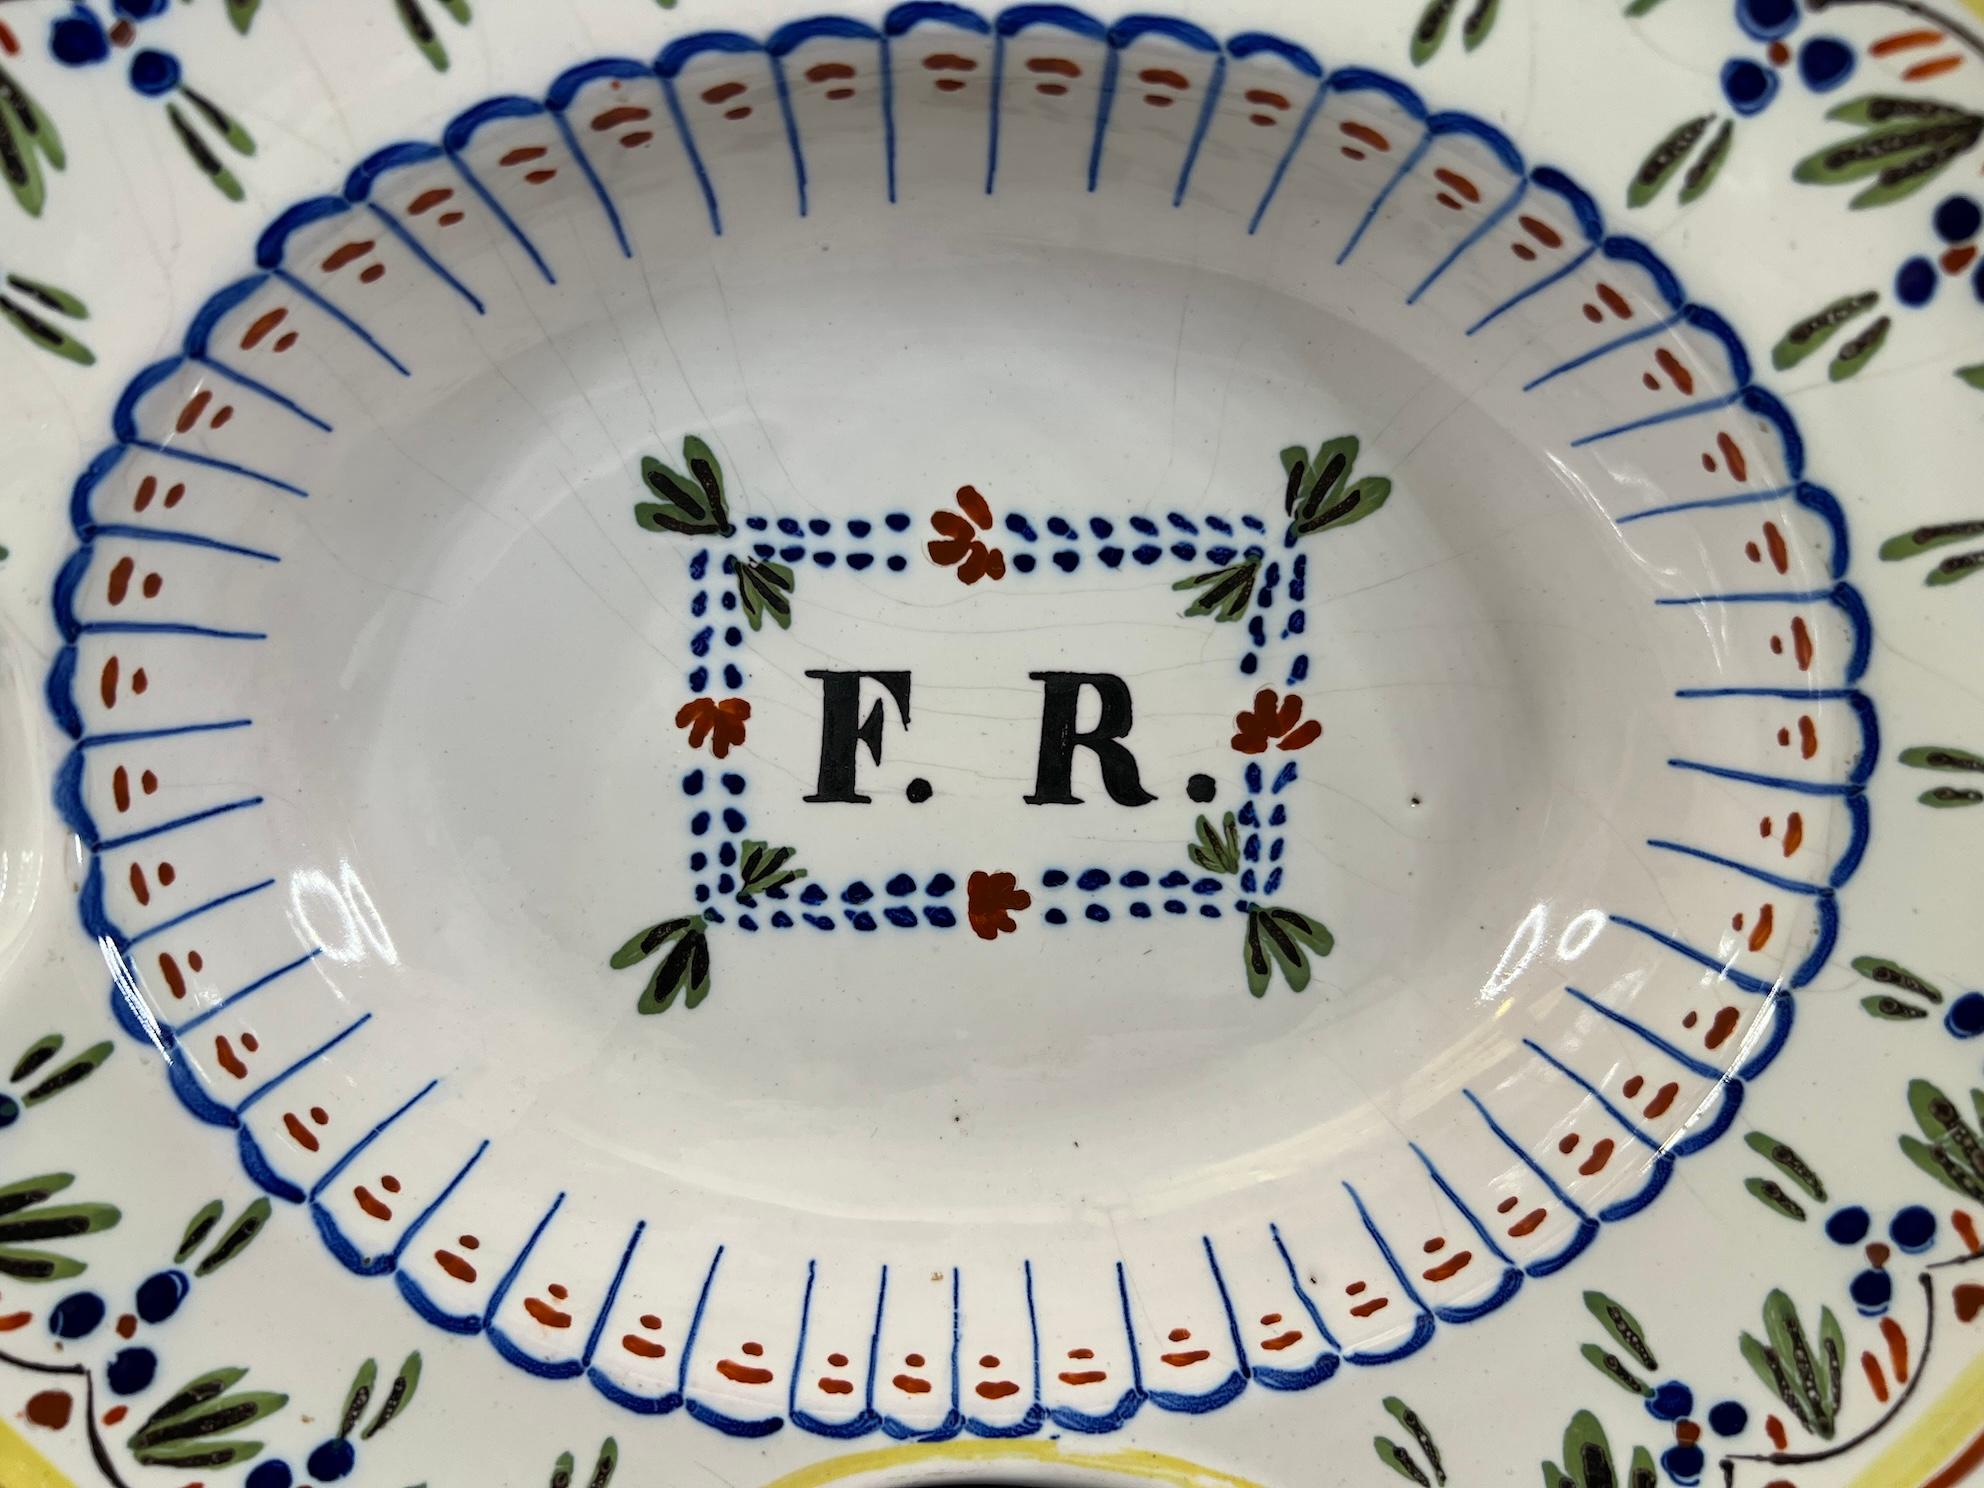 Ancient shaving dish from Nevers Auxerre with a cartouche at the center bearing the initials monogram F R. The dish is beautifully decorated.  In good condition with a chip in the enamel on the edge.  

Dimensions:  28cm x 24cm (11.02 inches x 9.45